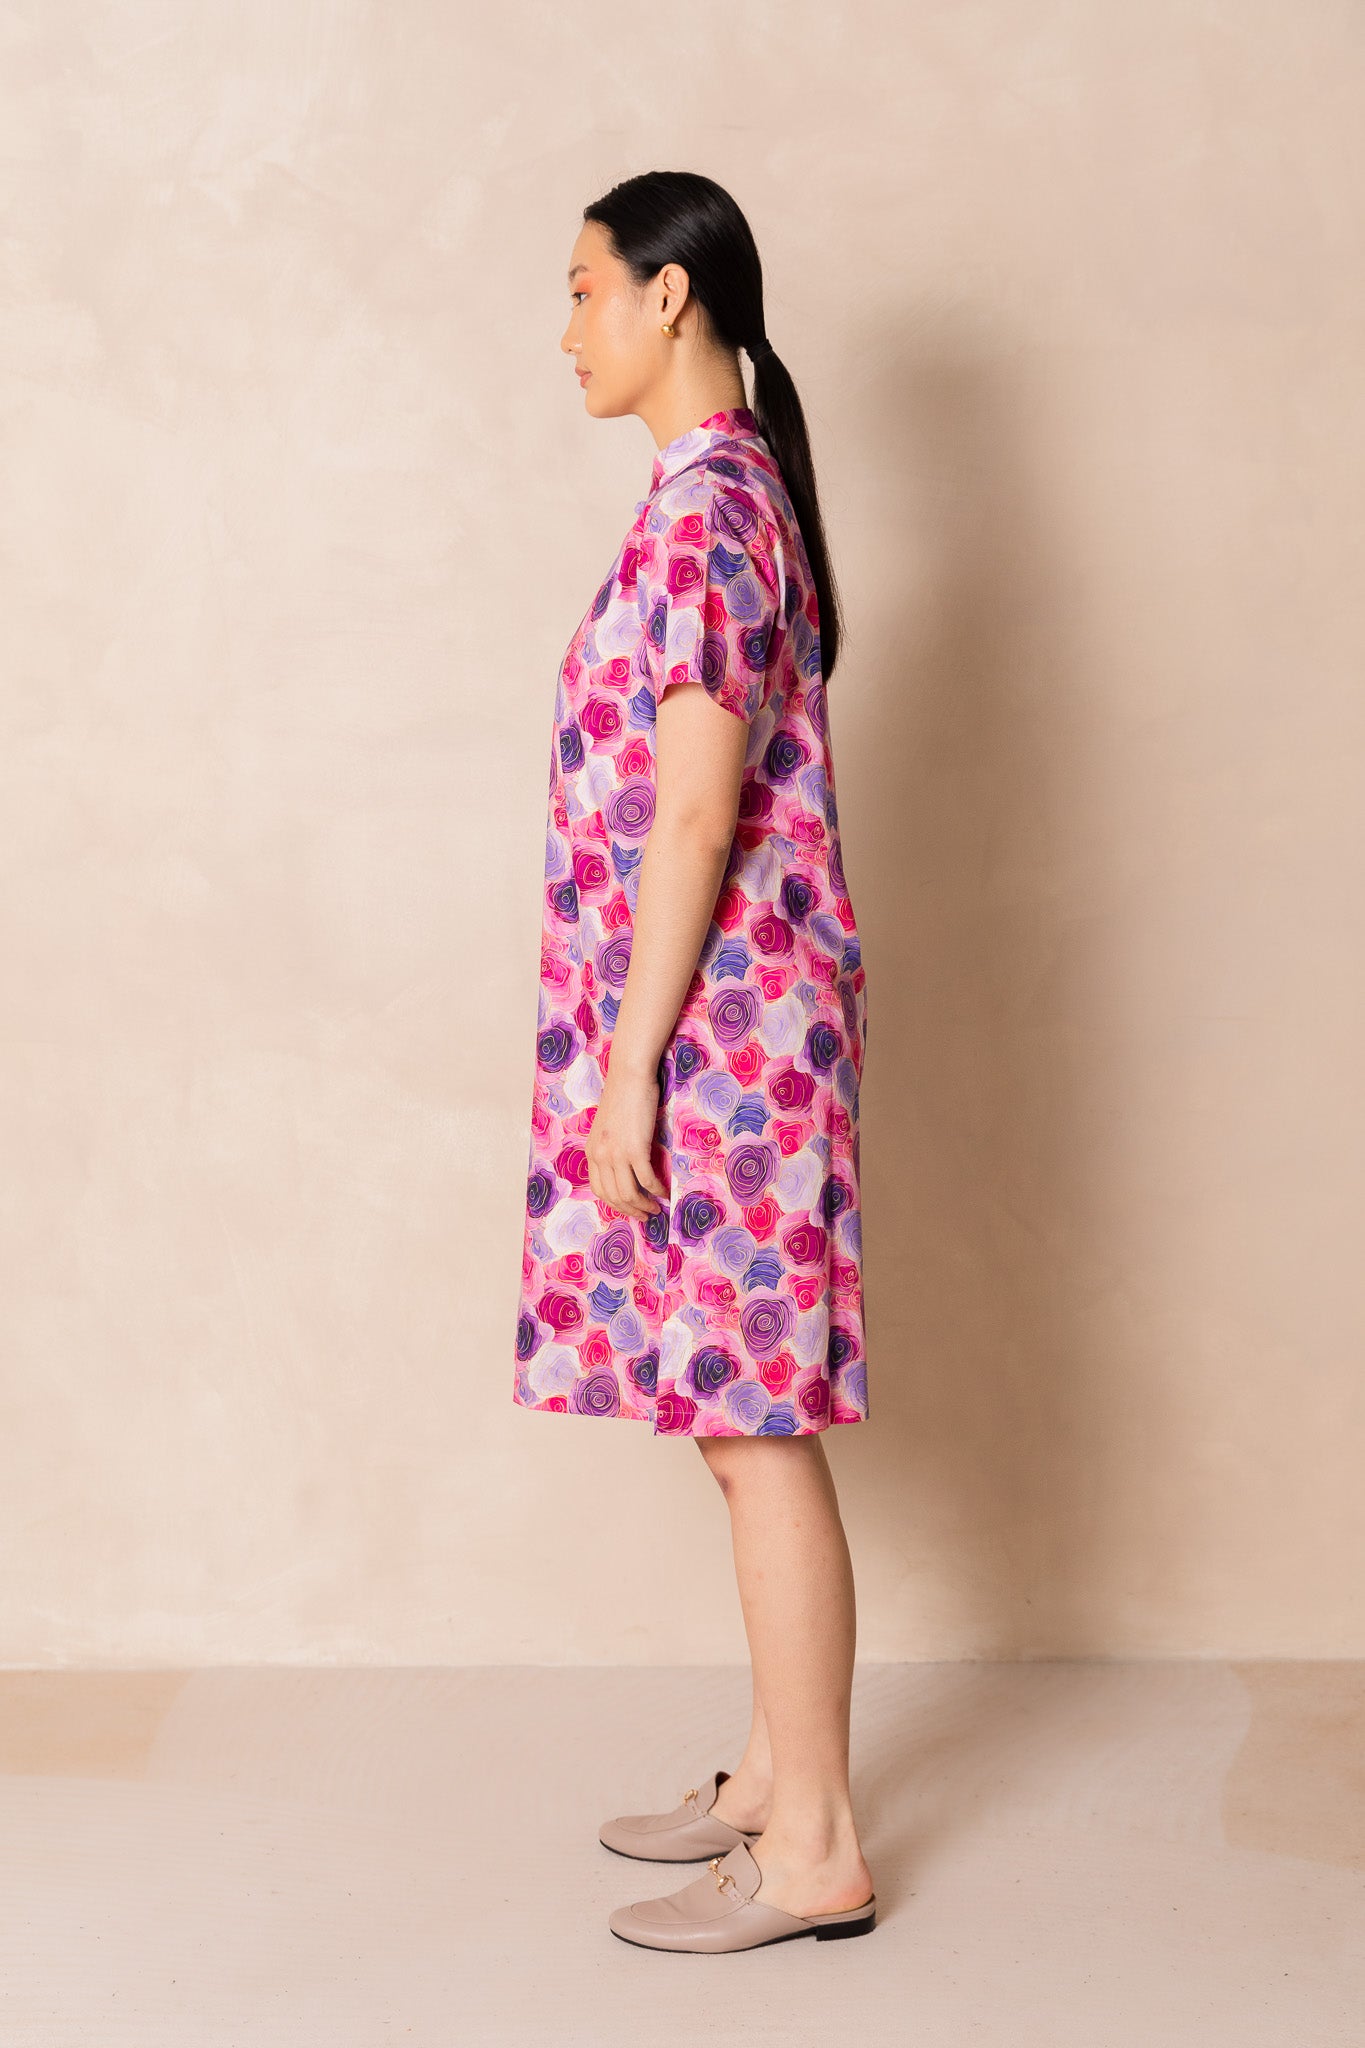 Water Colour Pink Rose Print Short Sleeve Cheongsam Midi Dress, available on You Living